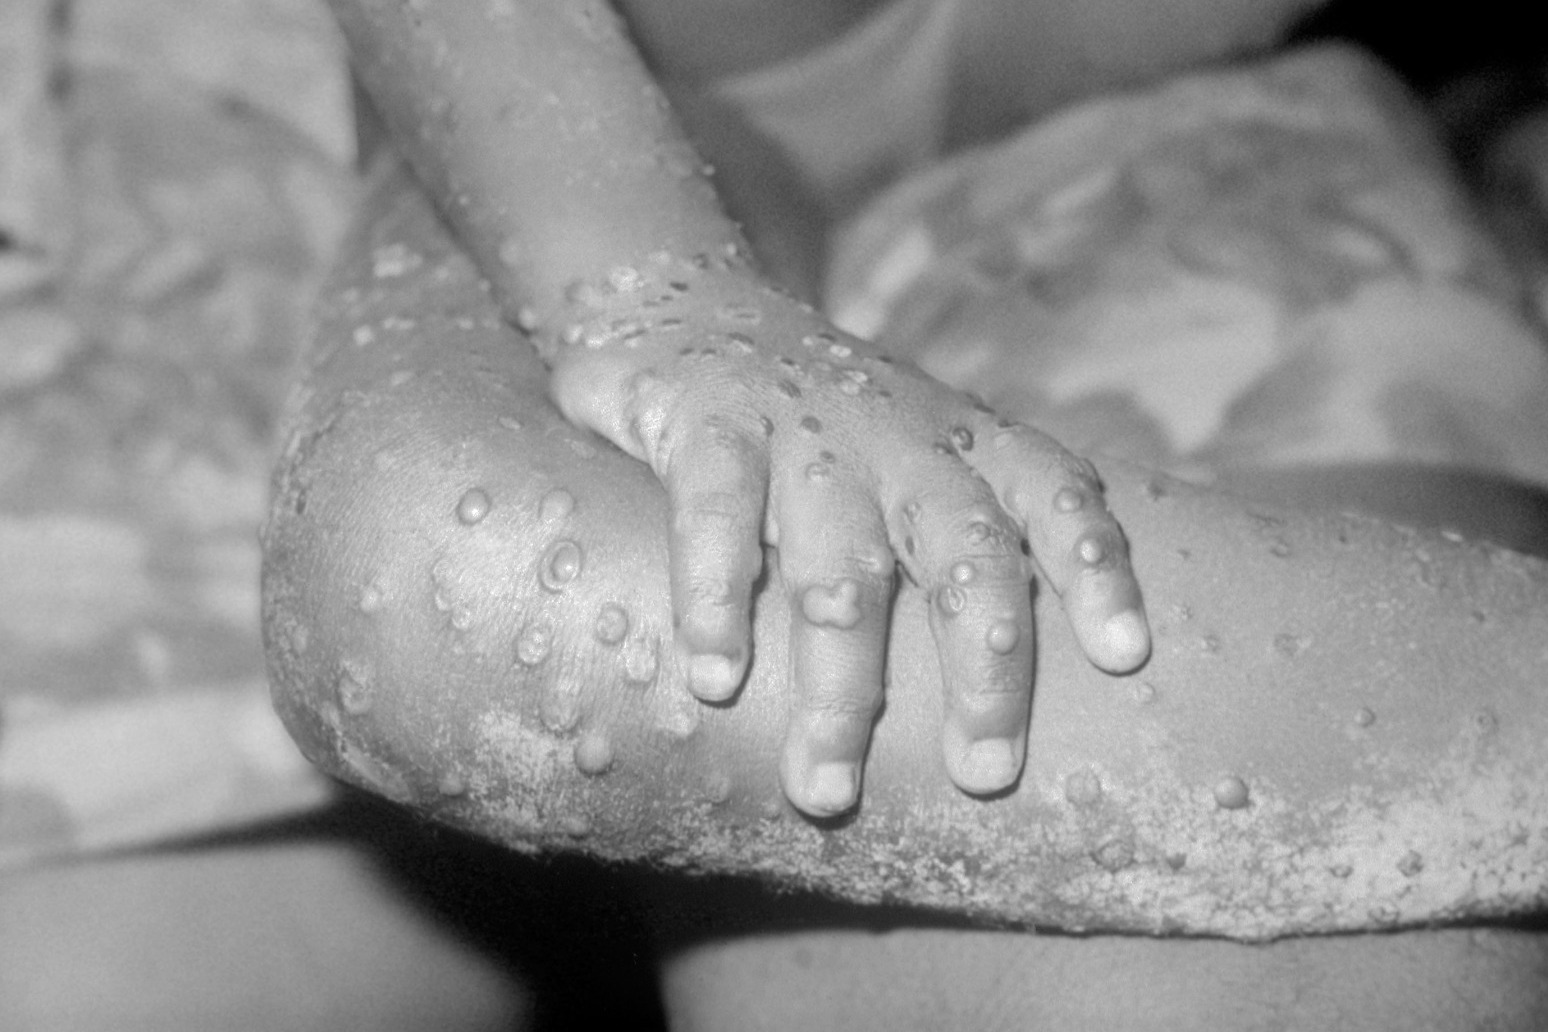 Medics must alert health authorities to monkeypox cases by law, UKHSA says 